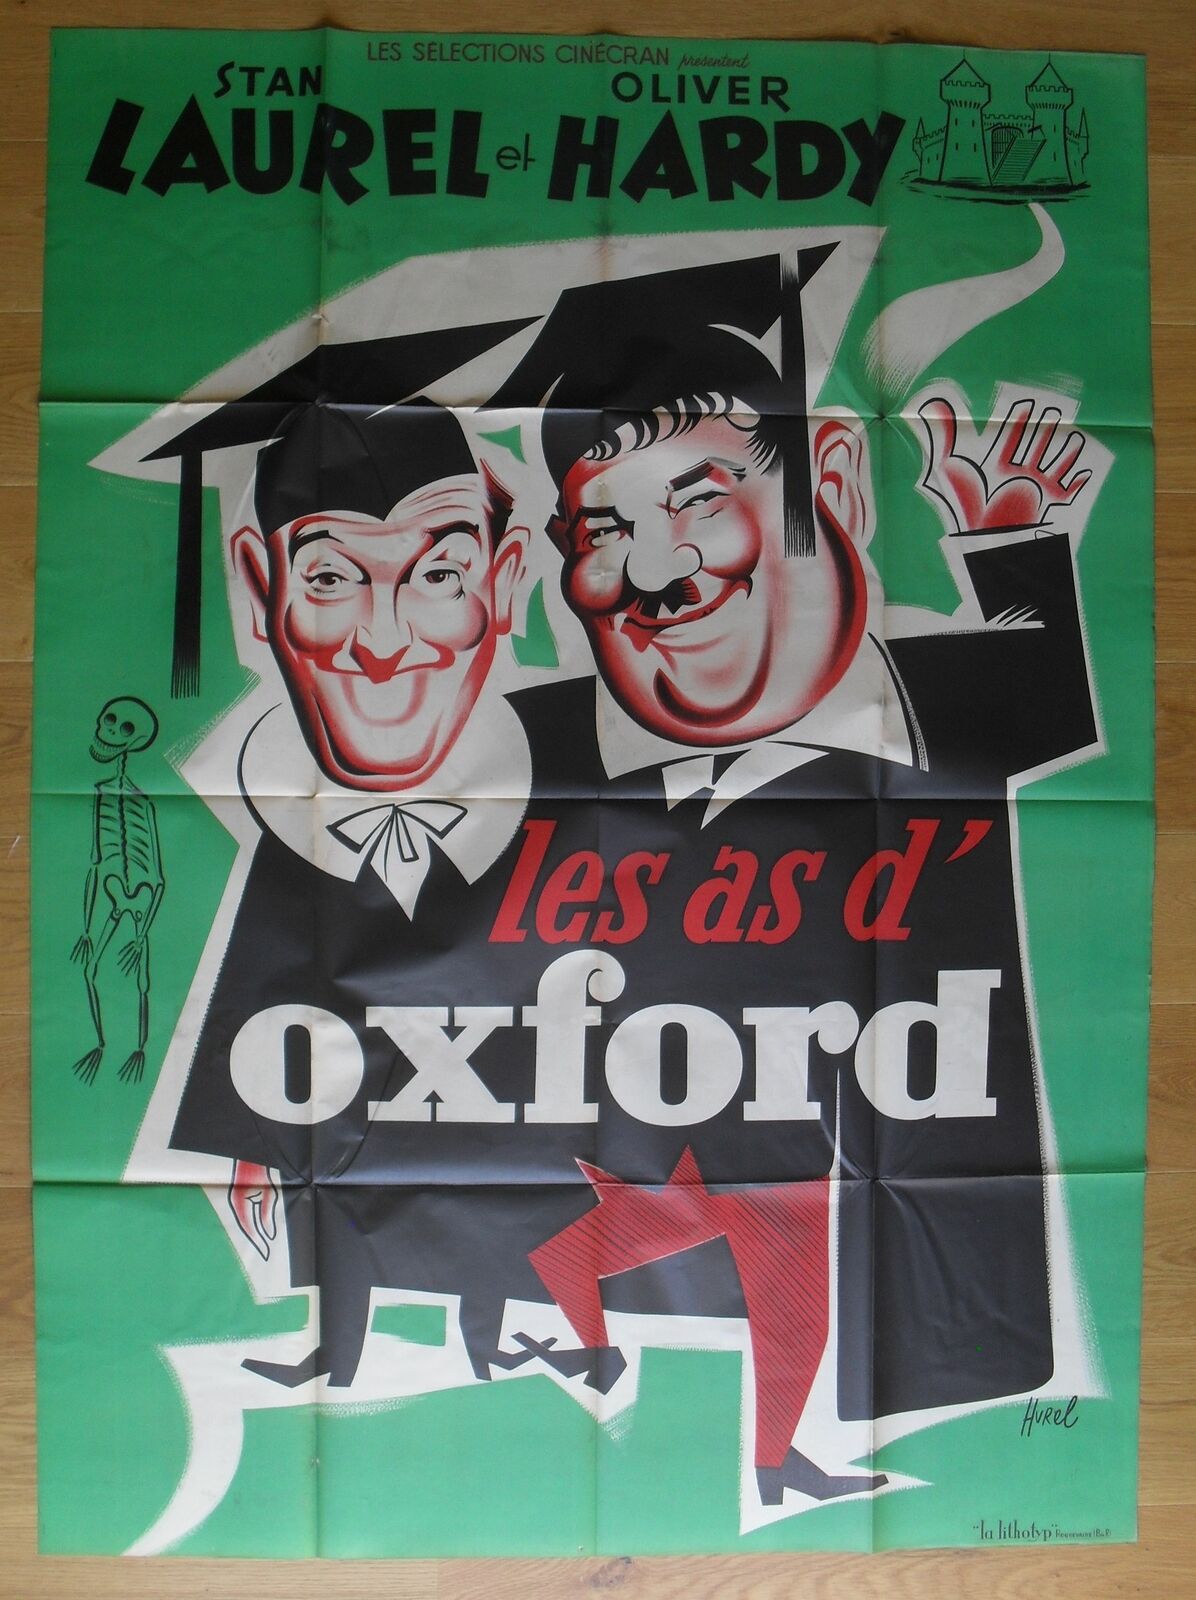 LAUREL AND HARDY chump at oxford original french movie poster R60s LITHO 63